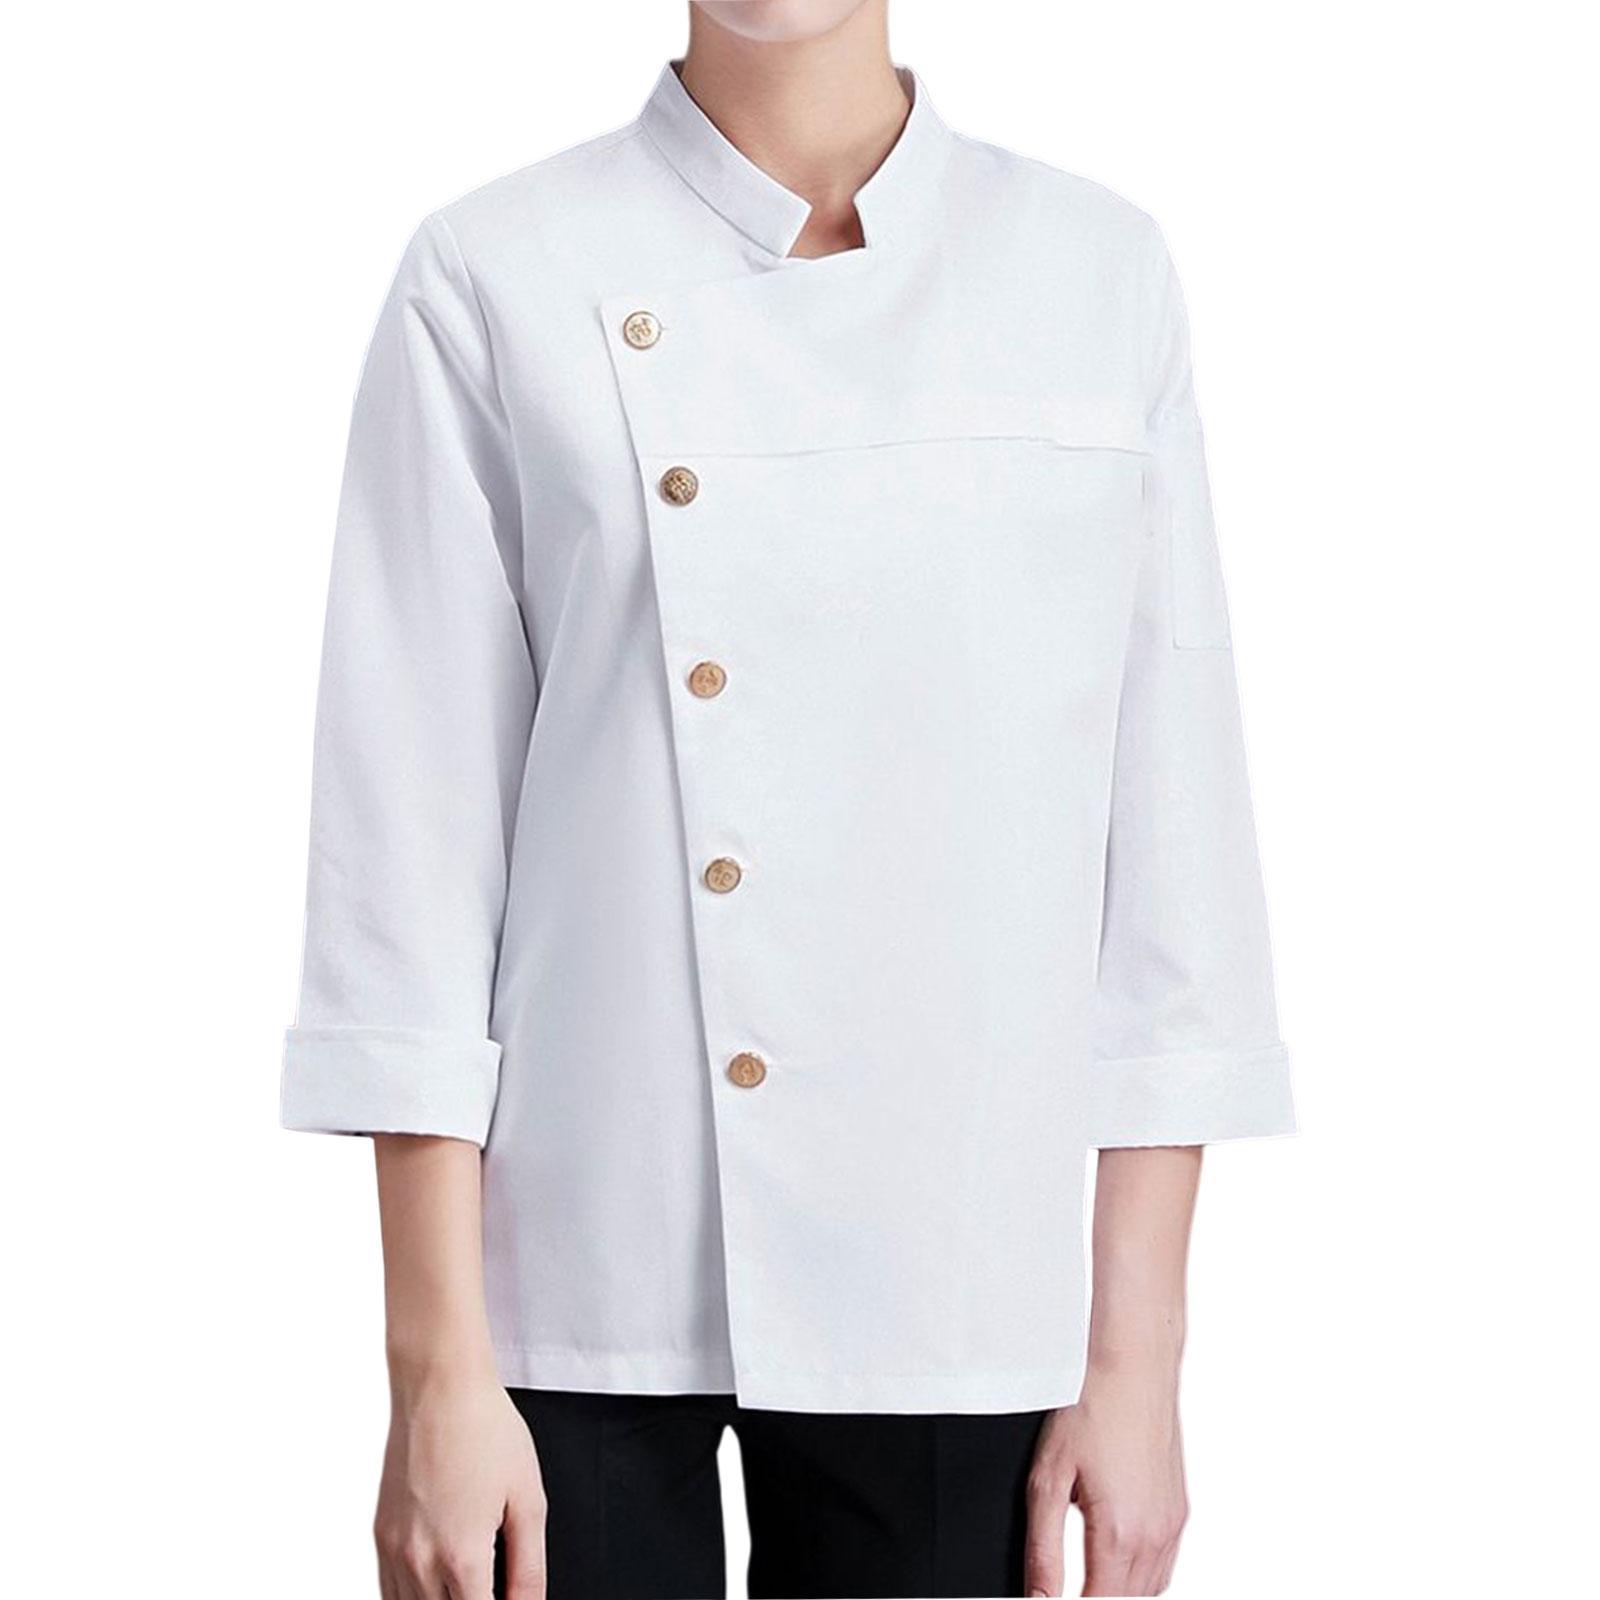 Chef Coat Jacket Uniform Catering Chef Clothing Workwear for Industry